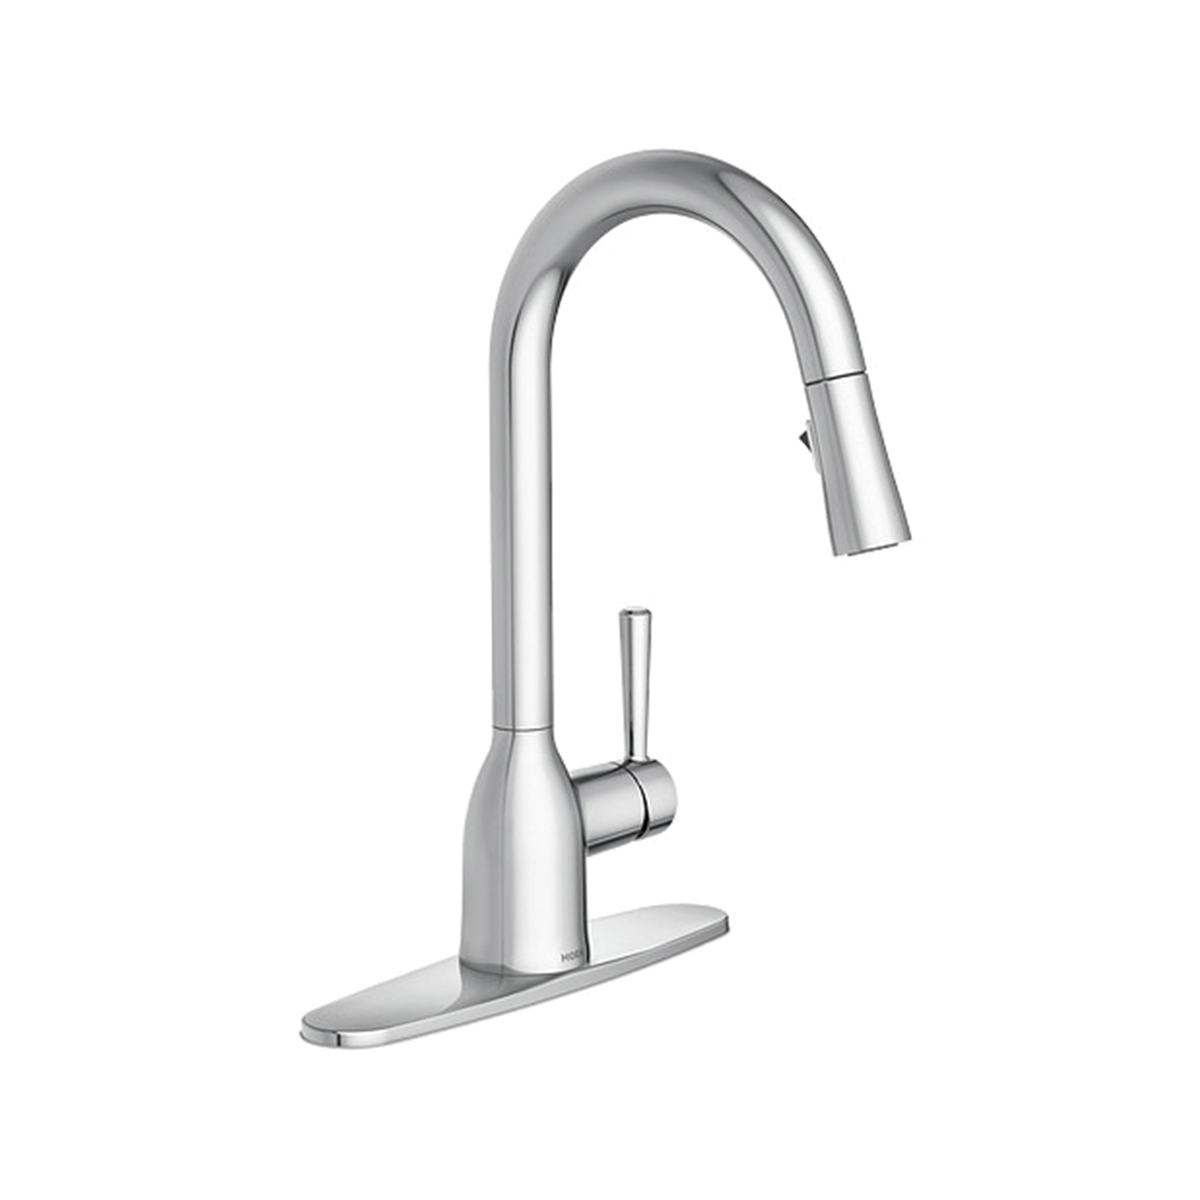 Adler Series 87233 Pull-Down Kitchen Faucet, 1.5 gpm, 1-Faucet Handle, 1-Faucet Hole, Metal, Chrome Plated